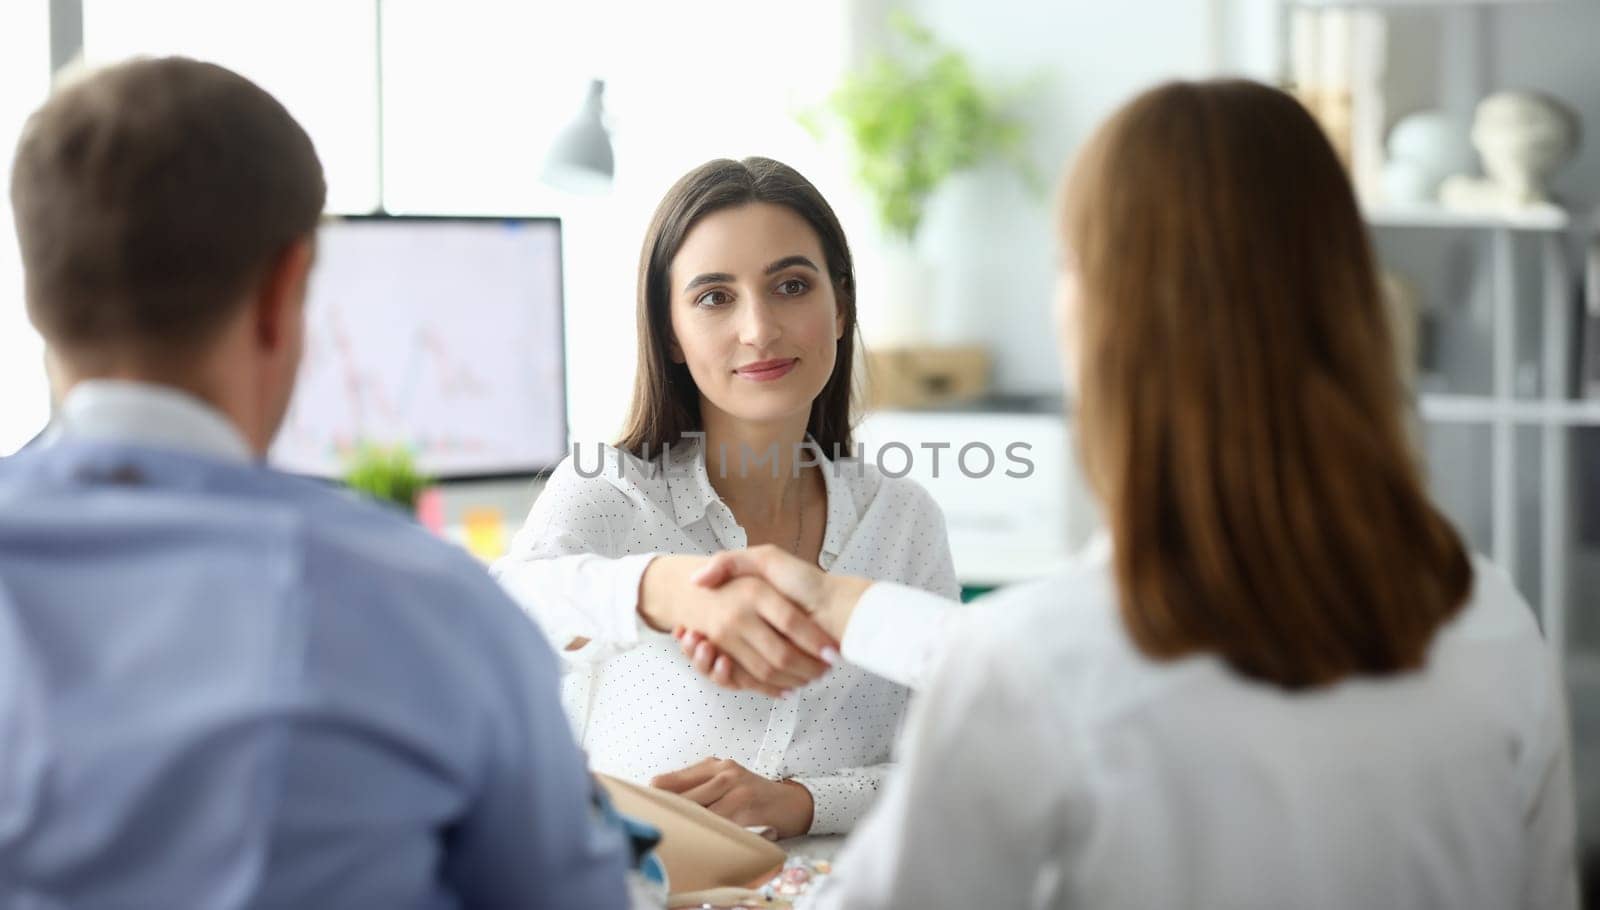 Portrait of joyful businesswoman sitting at modern workplace and shaking hand with woman partner. Businesslady looking at partner with calmness. Business negotiations concept